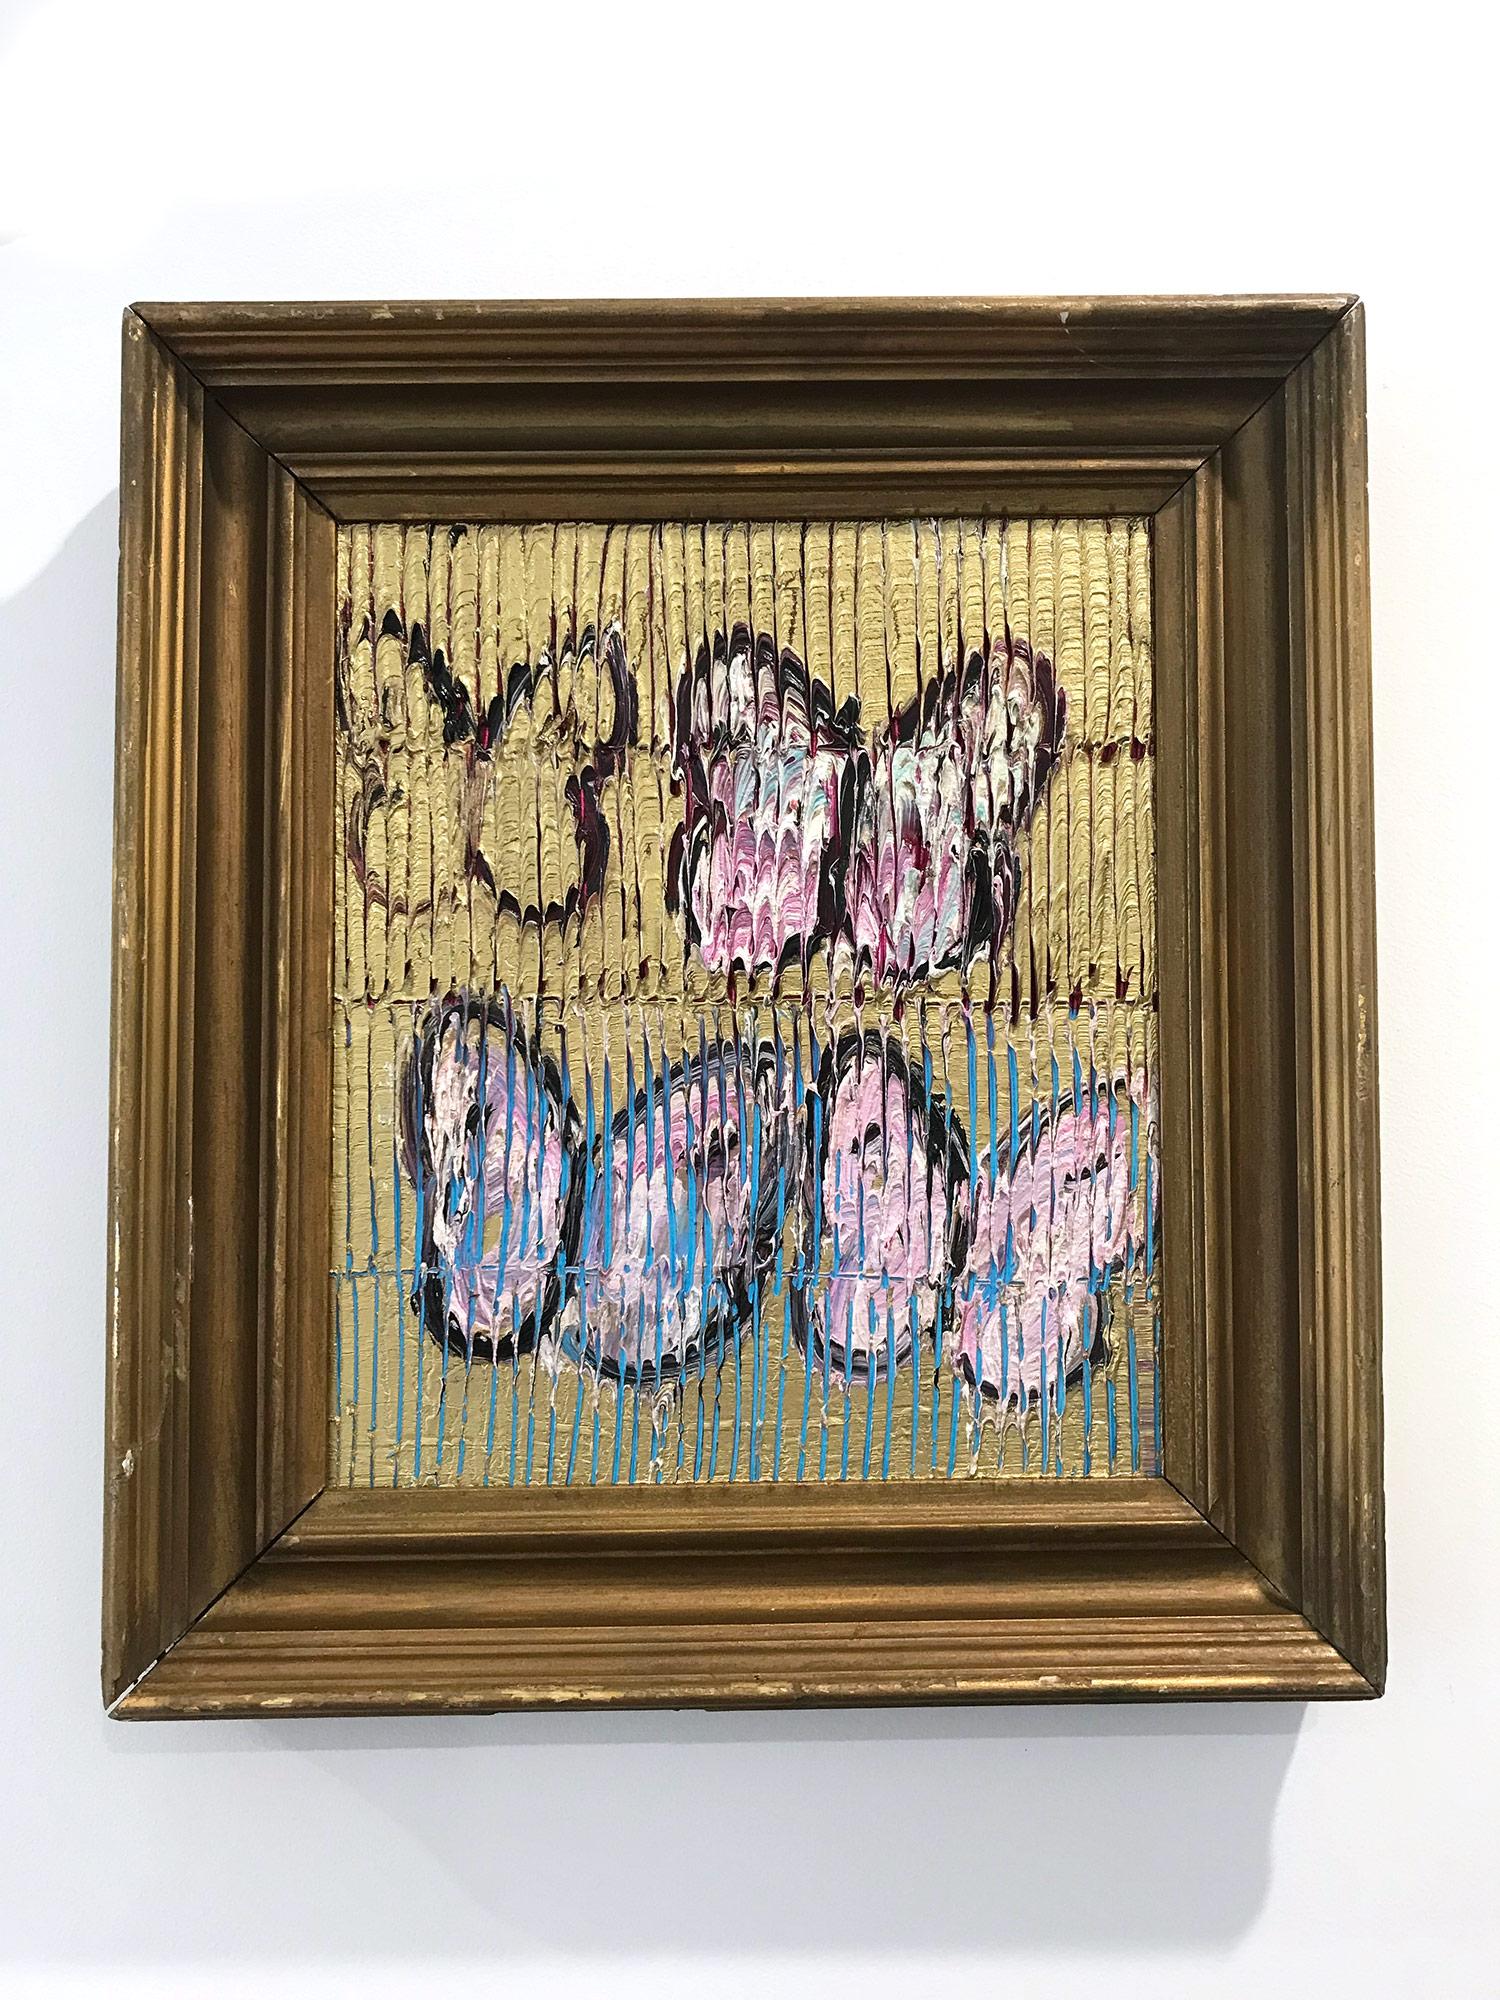 A wonderful composition of one of Slonem's most iconic subjects, Butterflies. This piece depicts delicate butterflies in ascension placed in a wonderful blue and silver landscape. Slonem traces his famous crosshatch details throughout the piece,